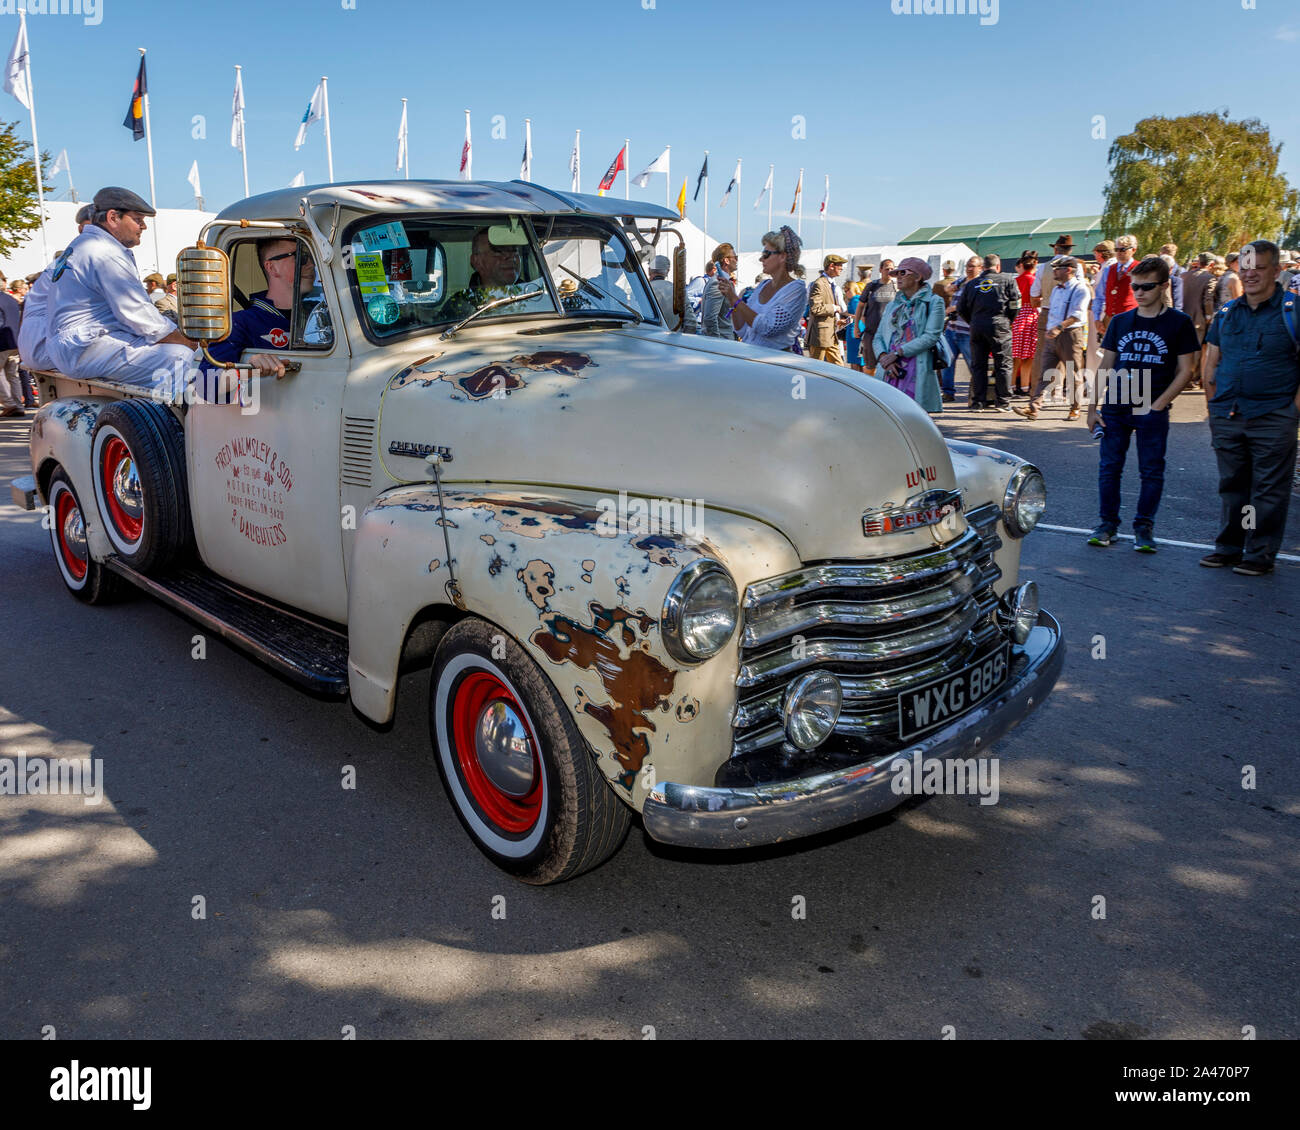 1953 Chevrolet 5-window Pick-up belonging to Fred Walmsley Motorcycles in the paddock at the 2019 Goodwood Revival, Sussex, UK. Stock Photo